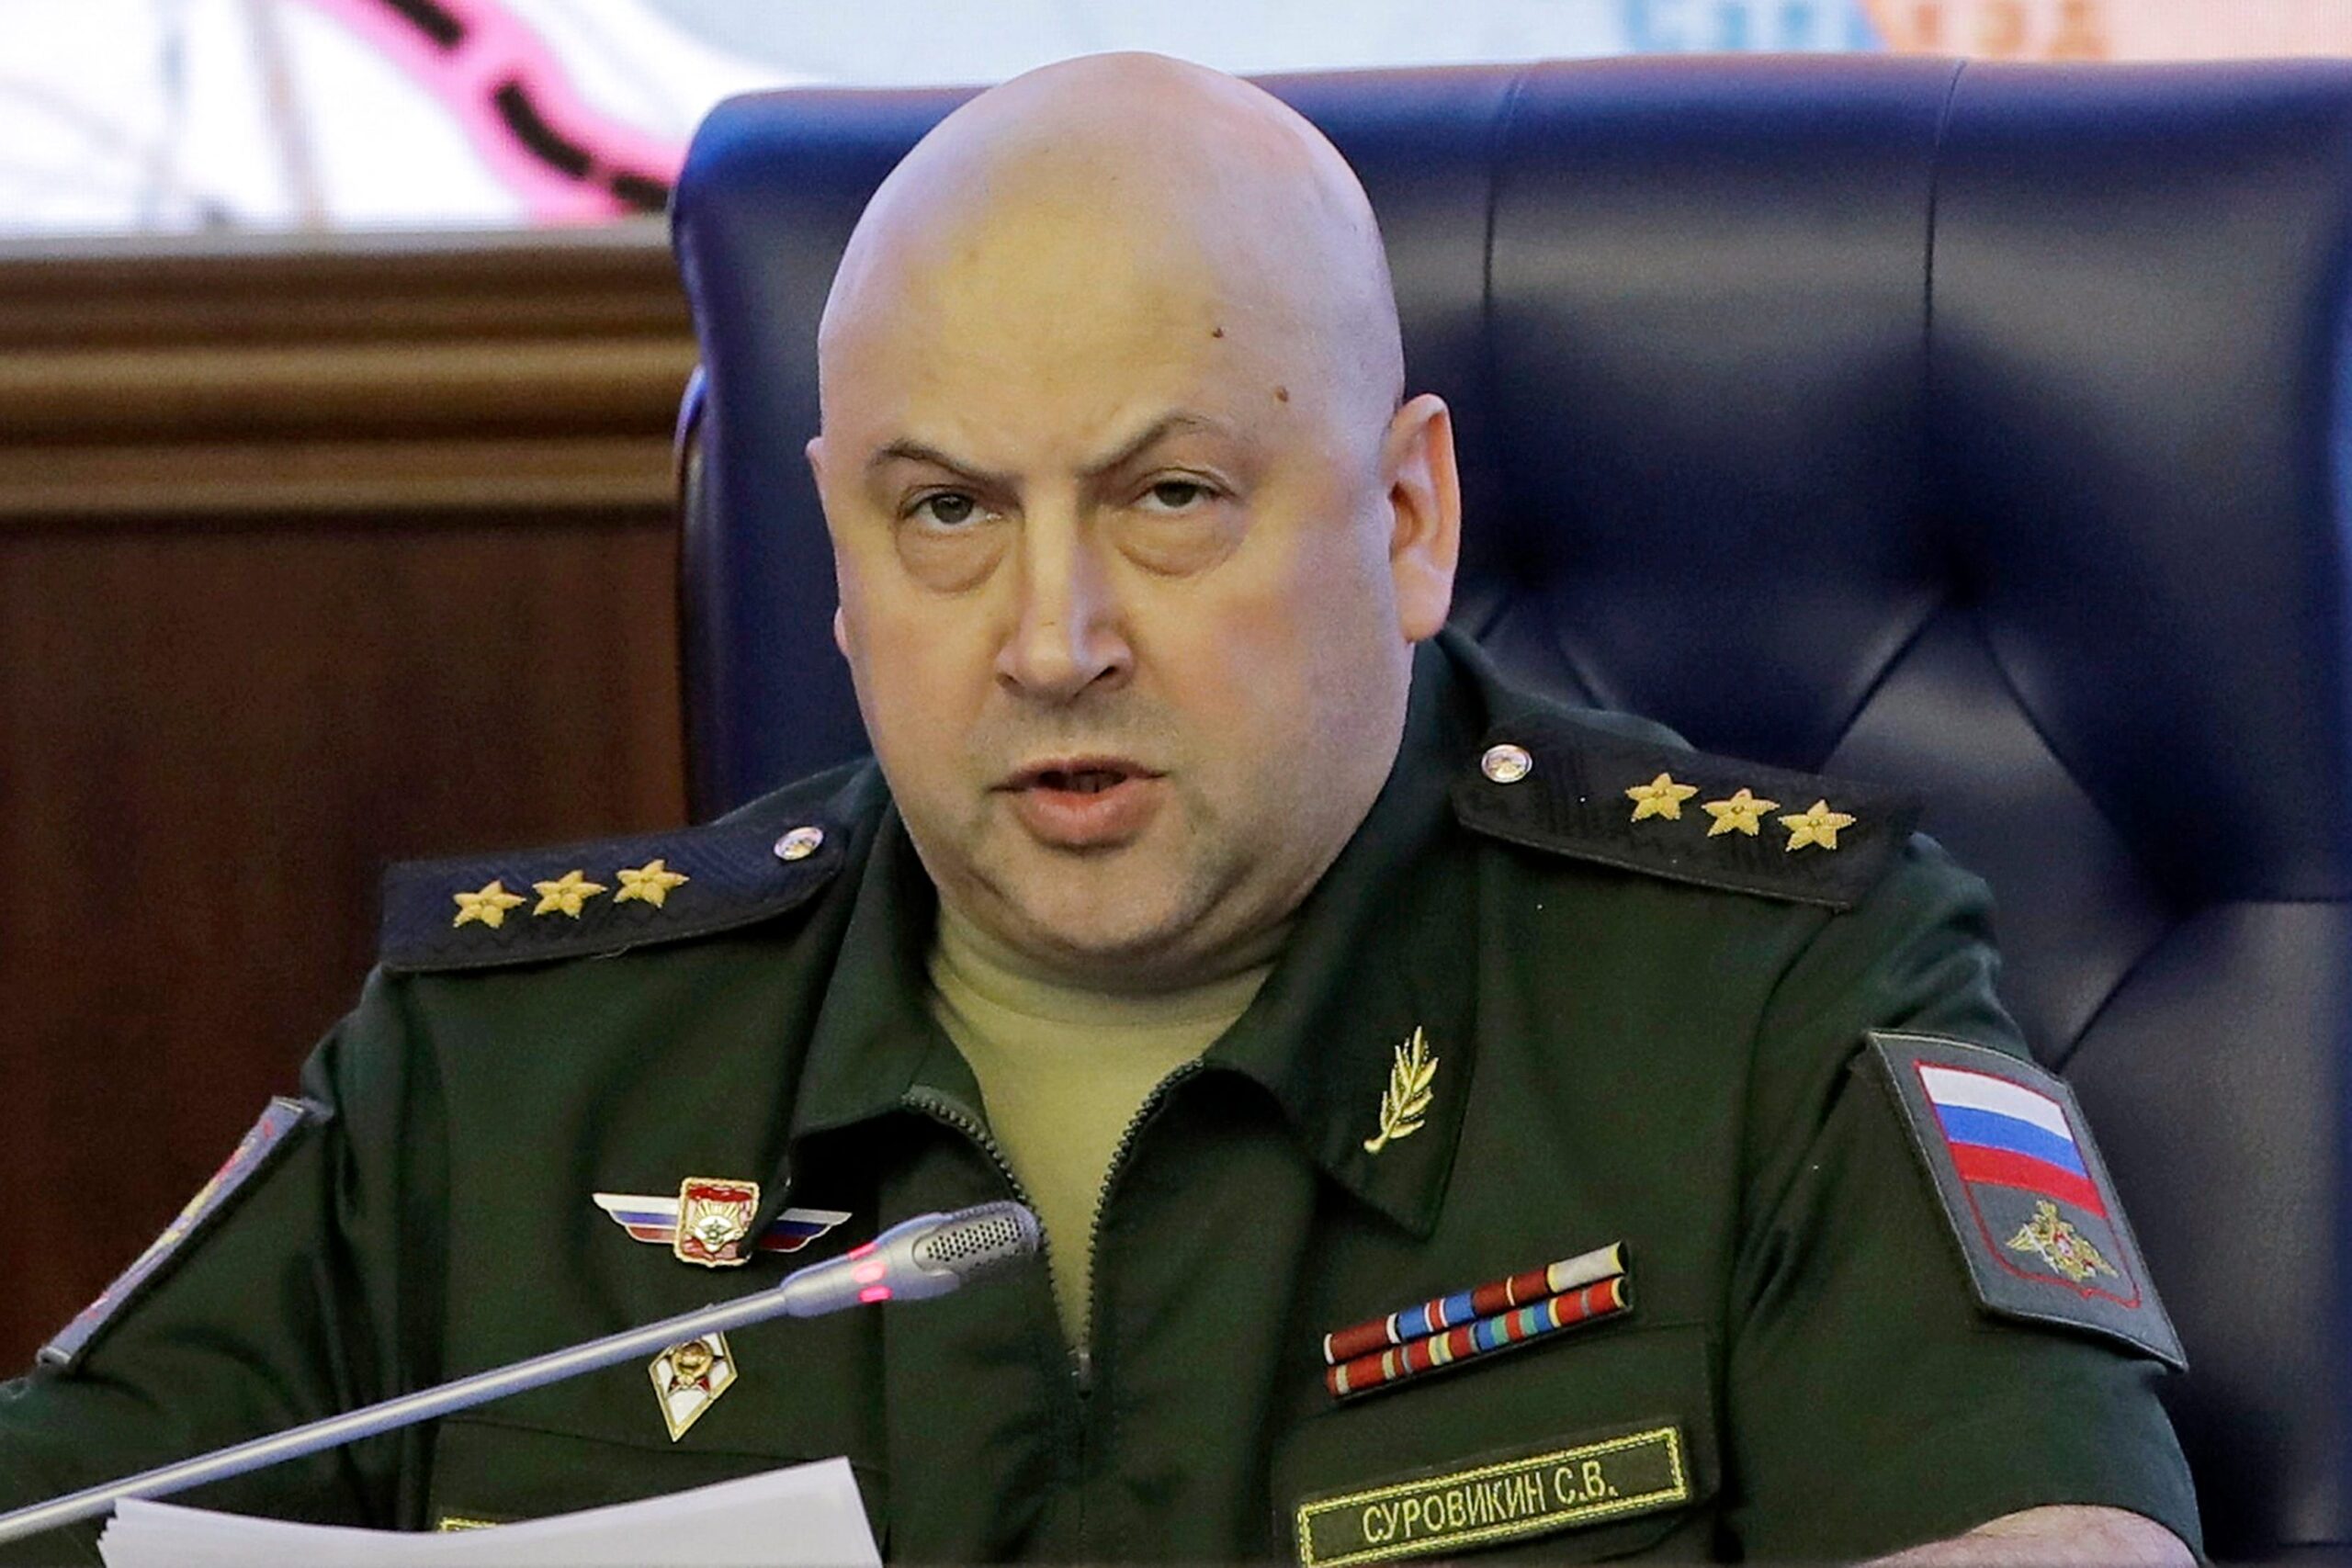 Colonel General Sergei Surovikin, Commander of the Russian forces in Syria, speaks, with a map of Syria projected on the screen in the back, at a briefing in the Russian Defense Ministry in Moscow, Russia, Friday, June 9, 2017. Russia&#39;s Defense Ministry announced that air force chief, Gen. Sergei Surovikin, would be the commander of all Russian troops fighting in Ukraine. The statement marked the first official appointment of a single commander for the entire Russian force in Ukraine.